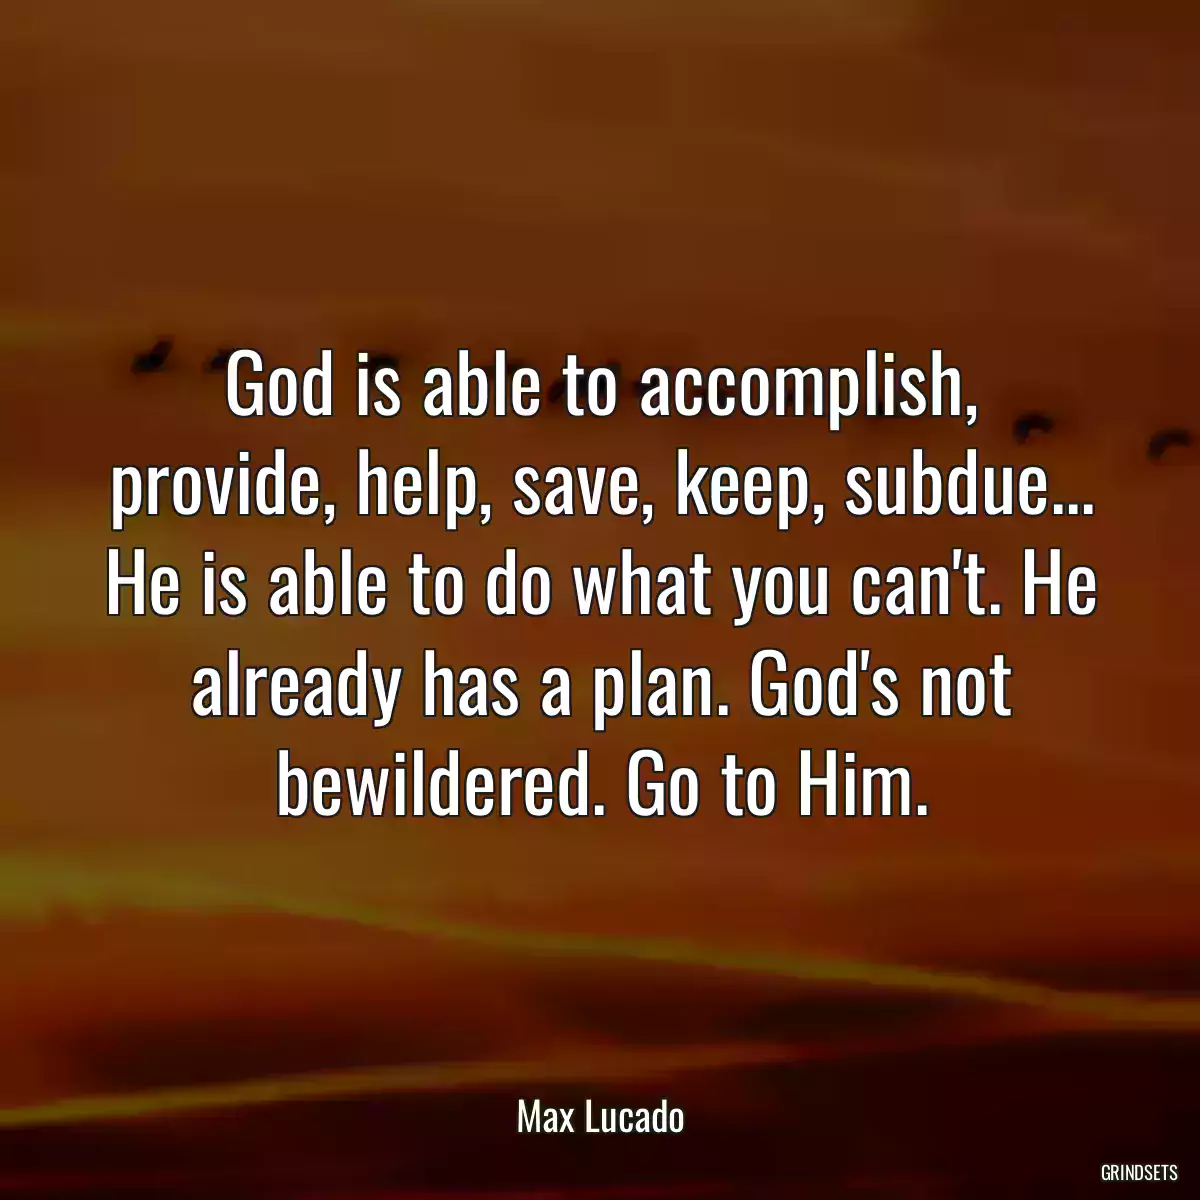 God is able to accomplish, provide, help, save, keep, subdue... He is able to do what you can\'t. He already has a plan. God\'s not bewildered. Go to Him.